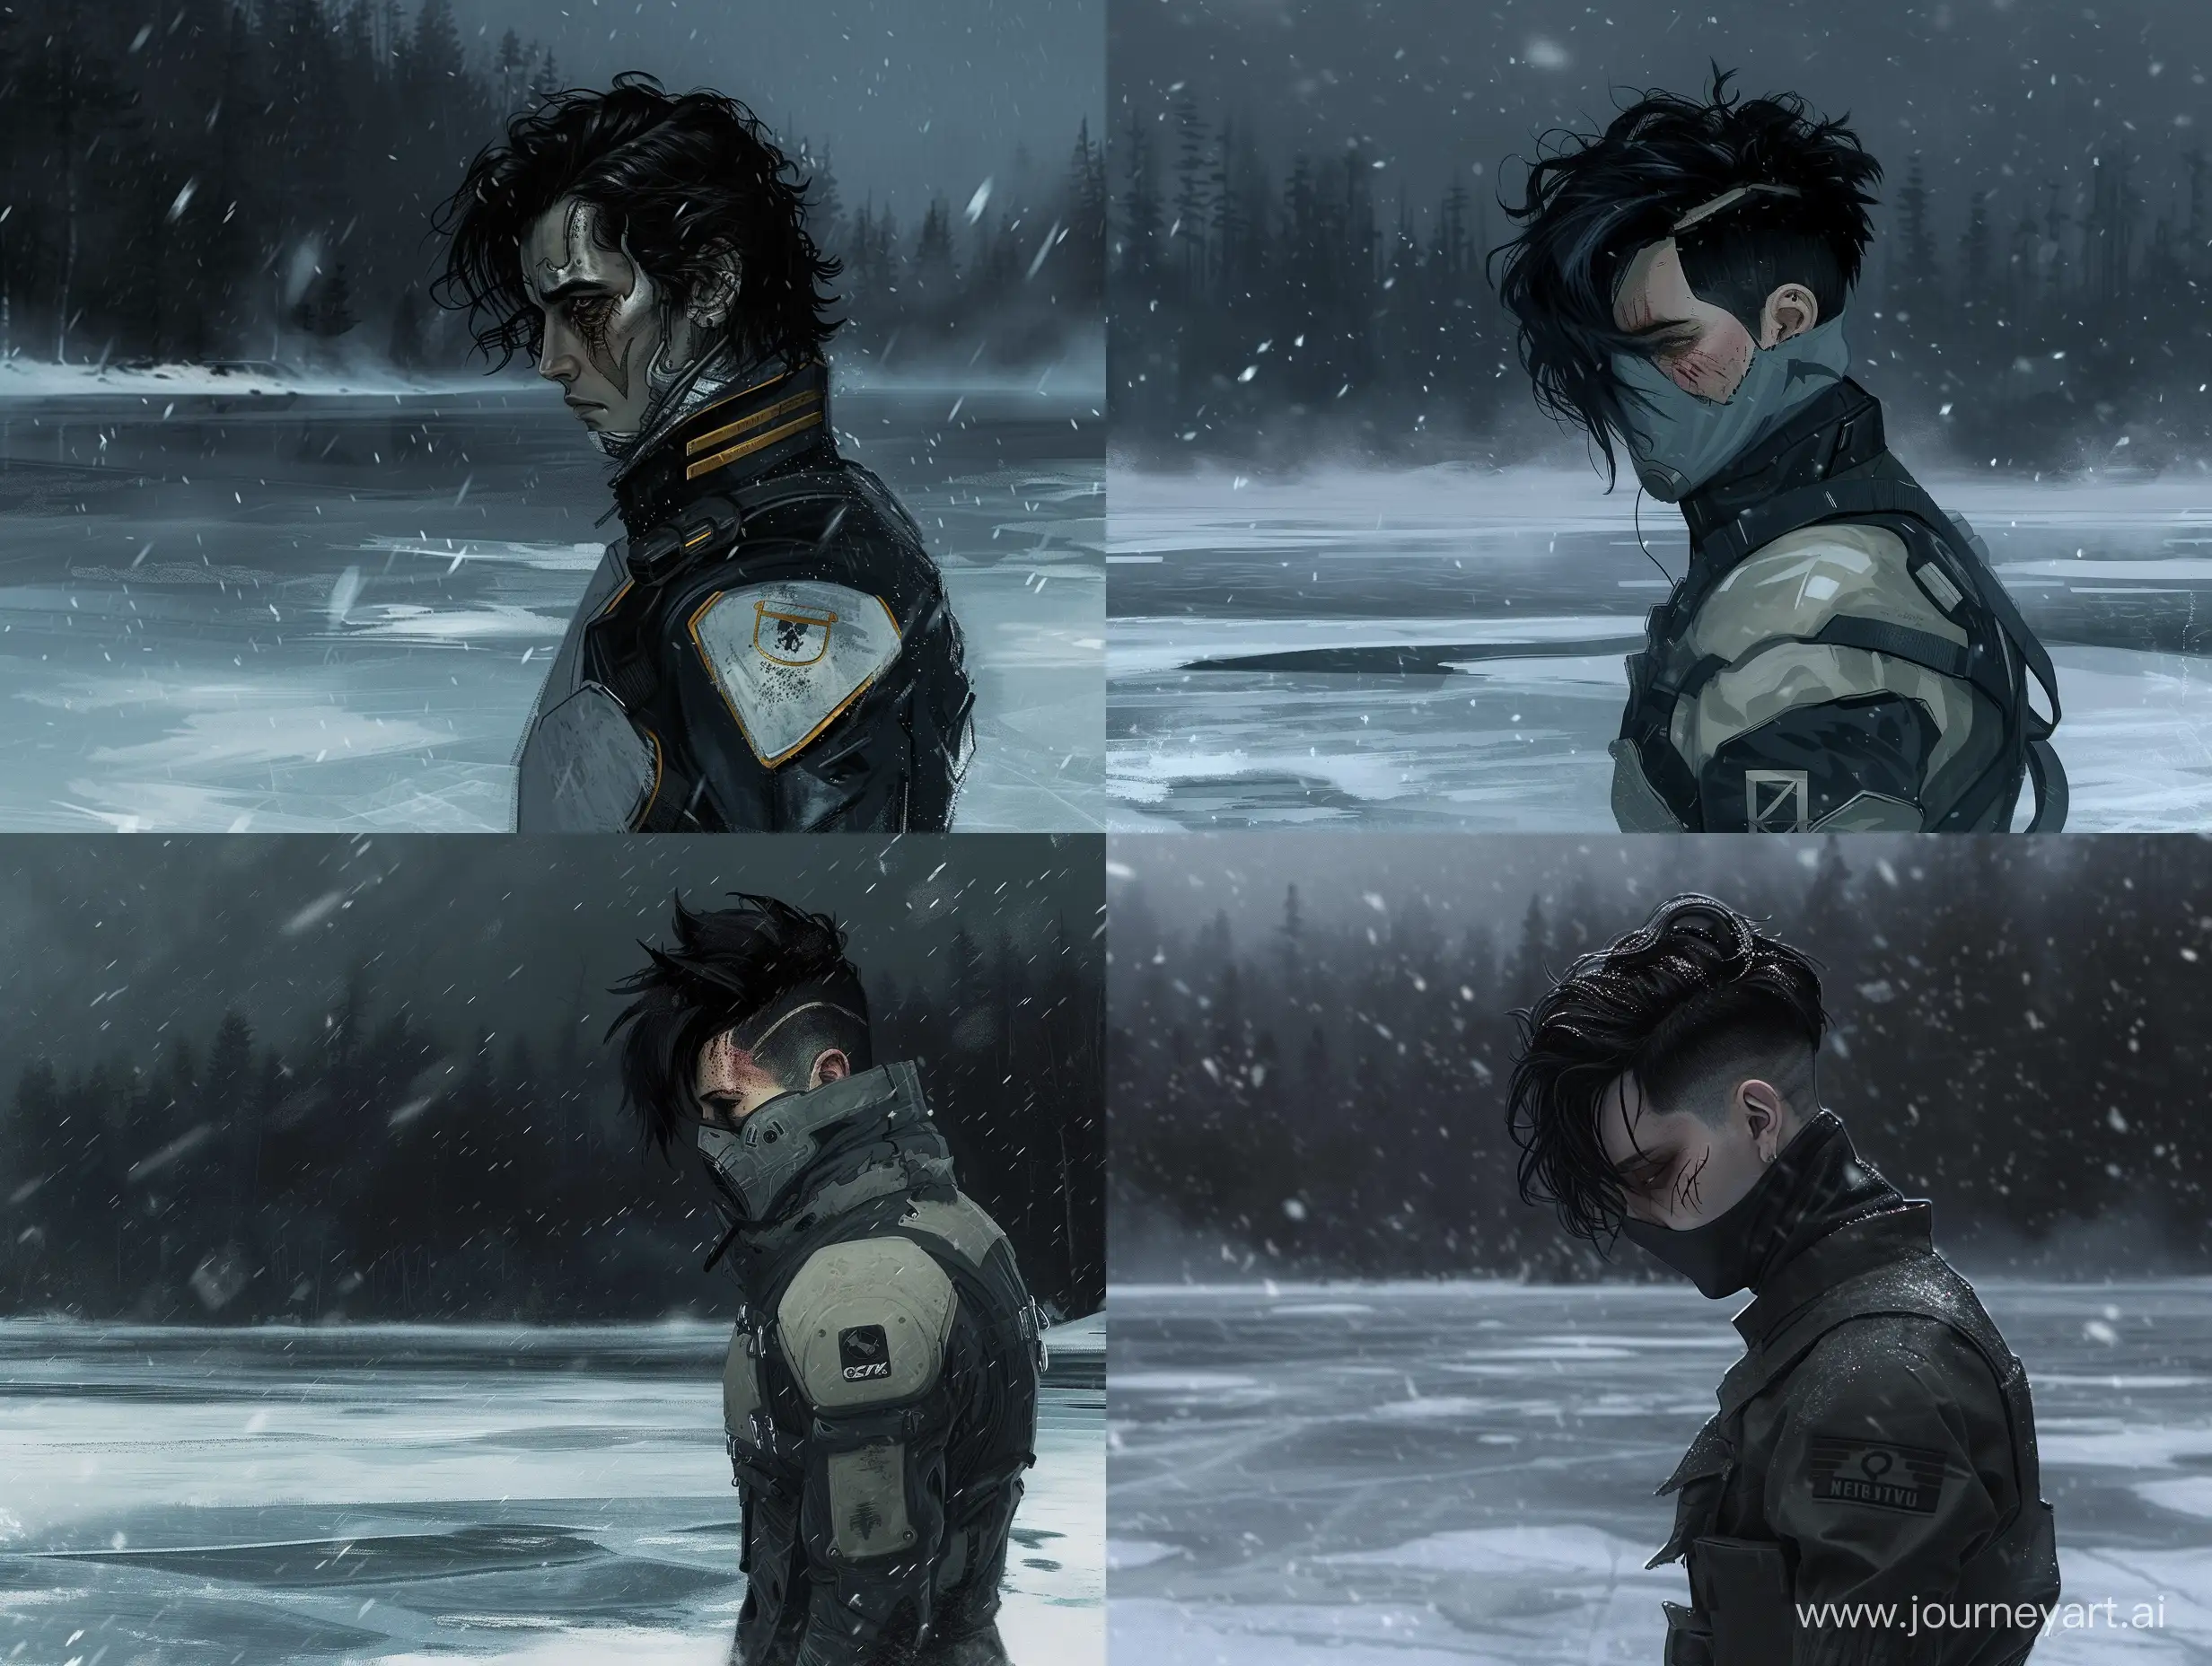 SciFi-Warrior-with-Scar-Icy-Lake-Standoff